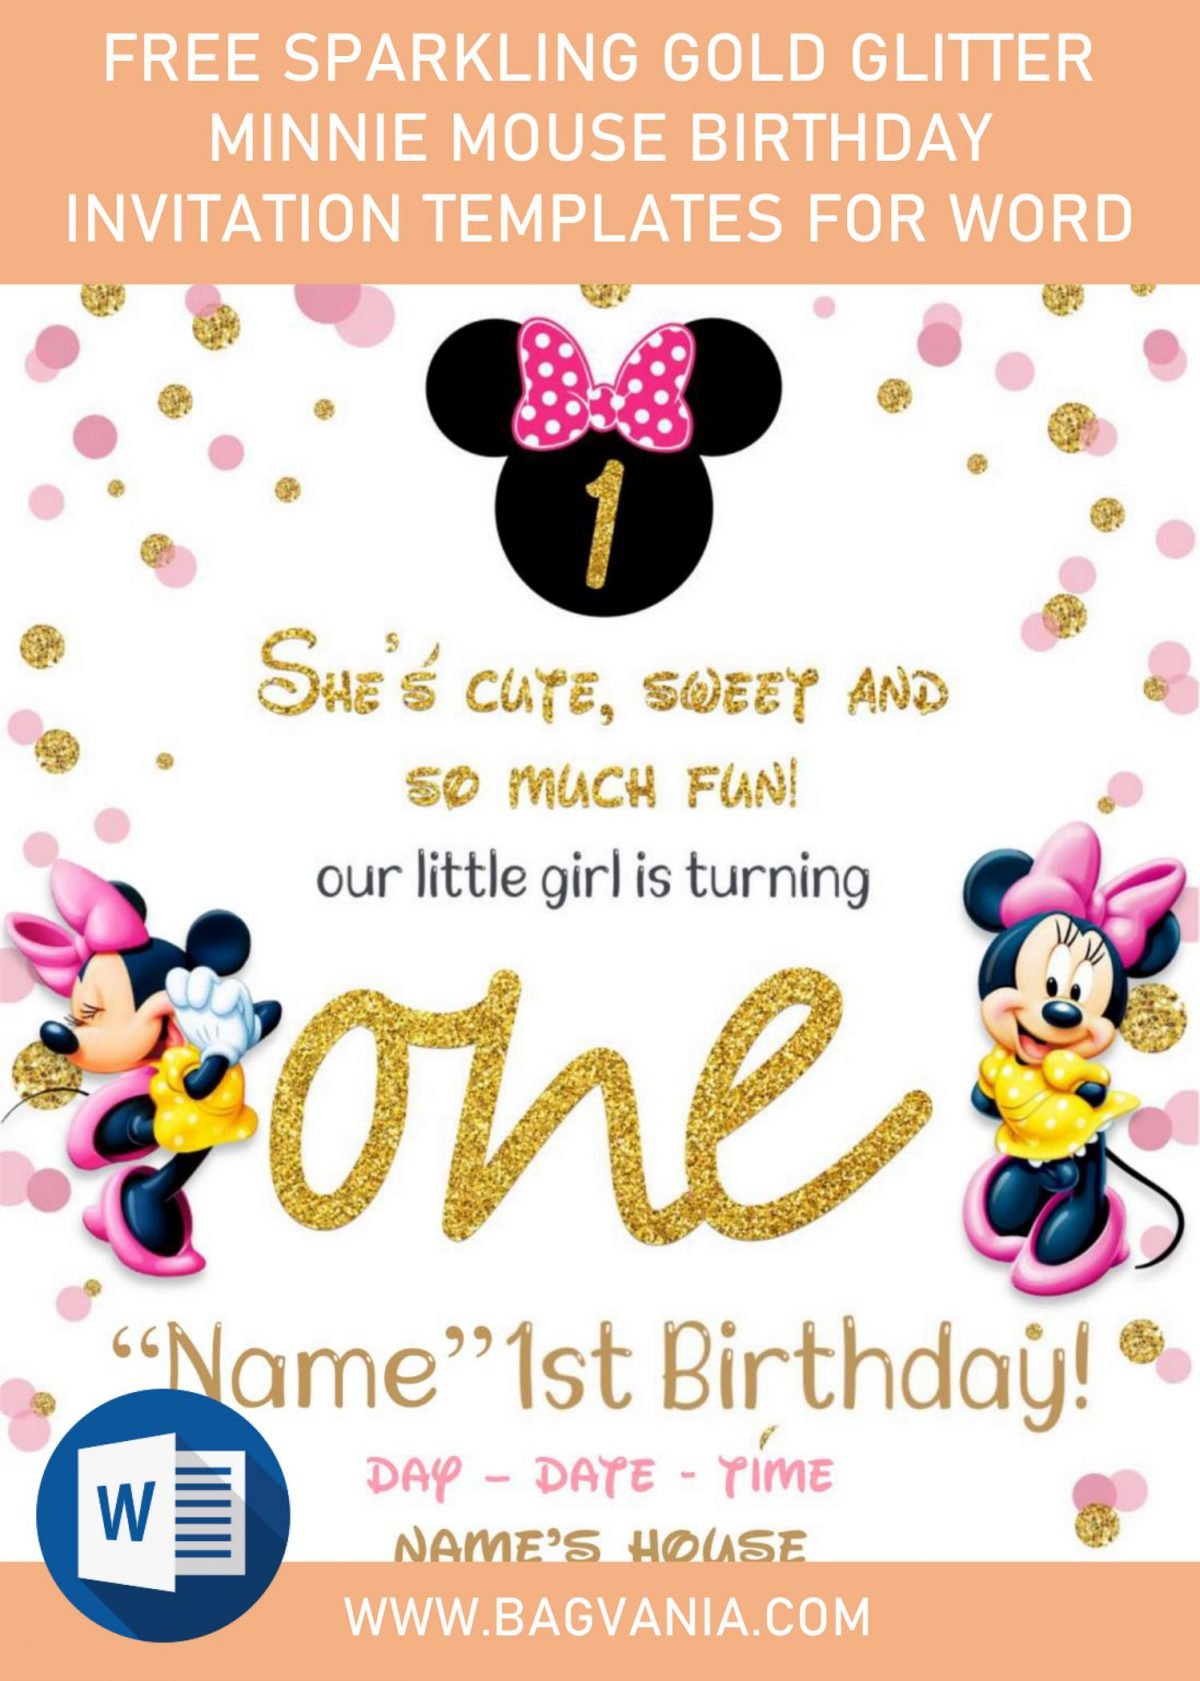 Free Sparkling Gold Glitter Minnie Mouse Birthday Invitation Templates For Word